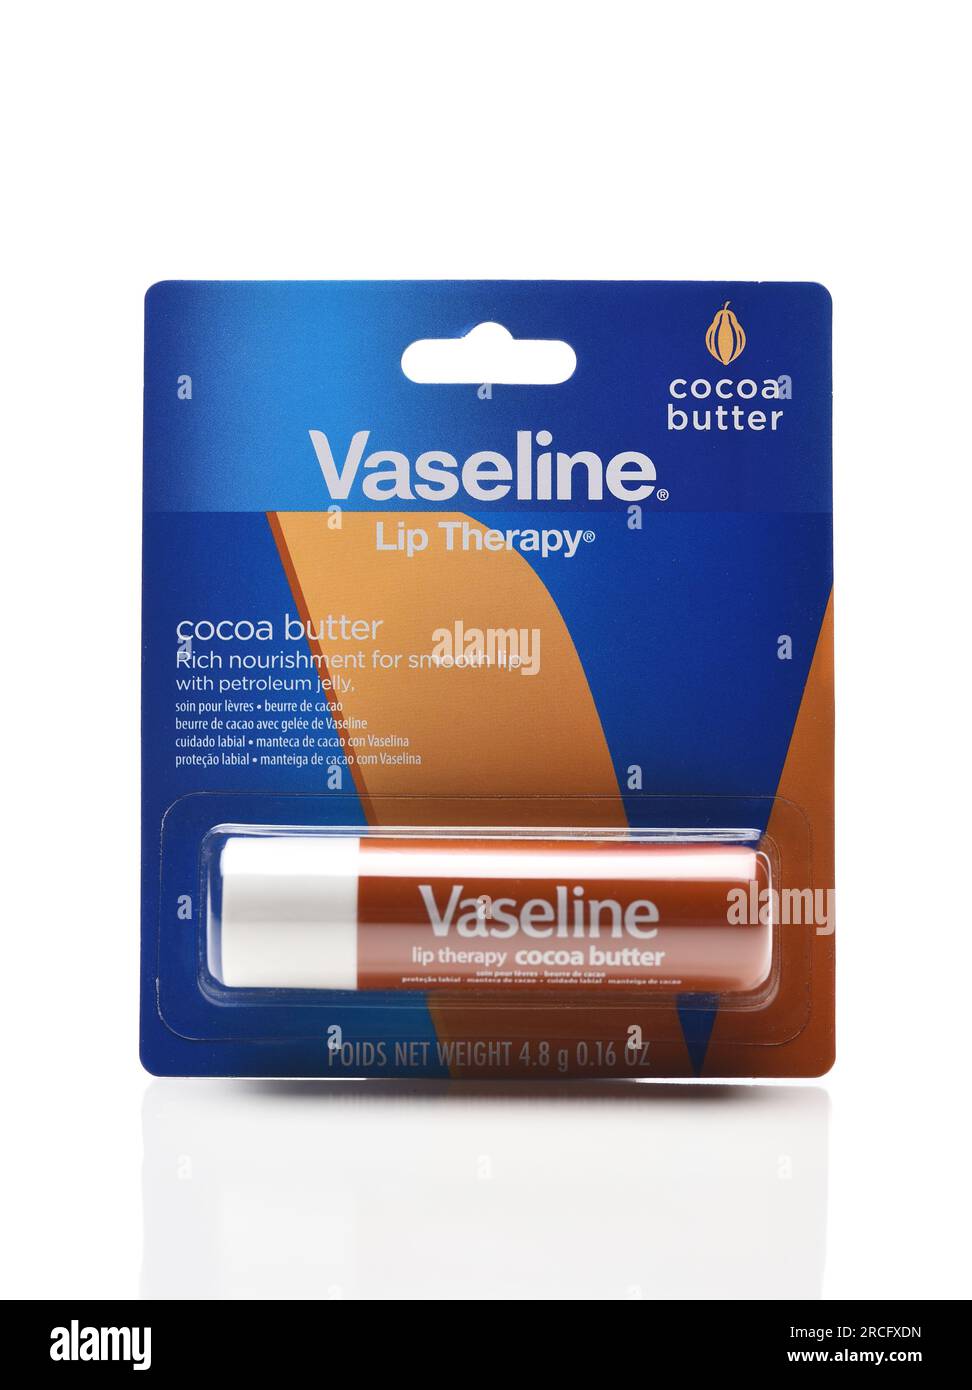 IRVINE, CALIFORNIA - 14 JULY 2023: A package of Vaseline Lip Therapy Cocoa Butter. Stock Photo